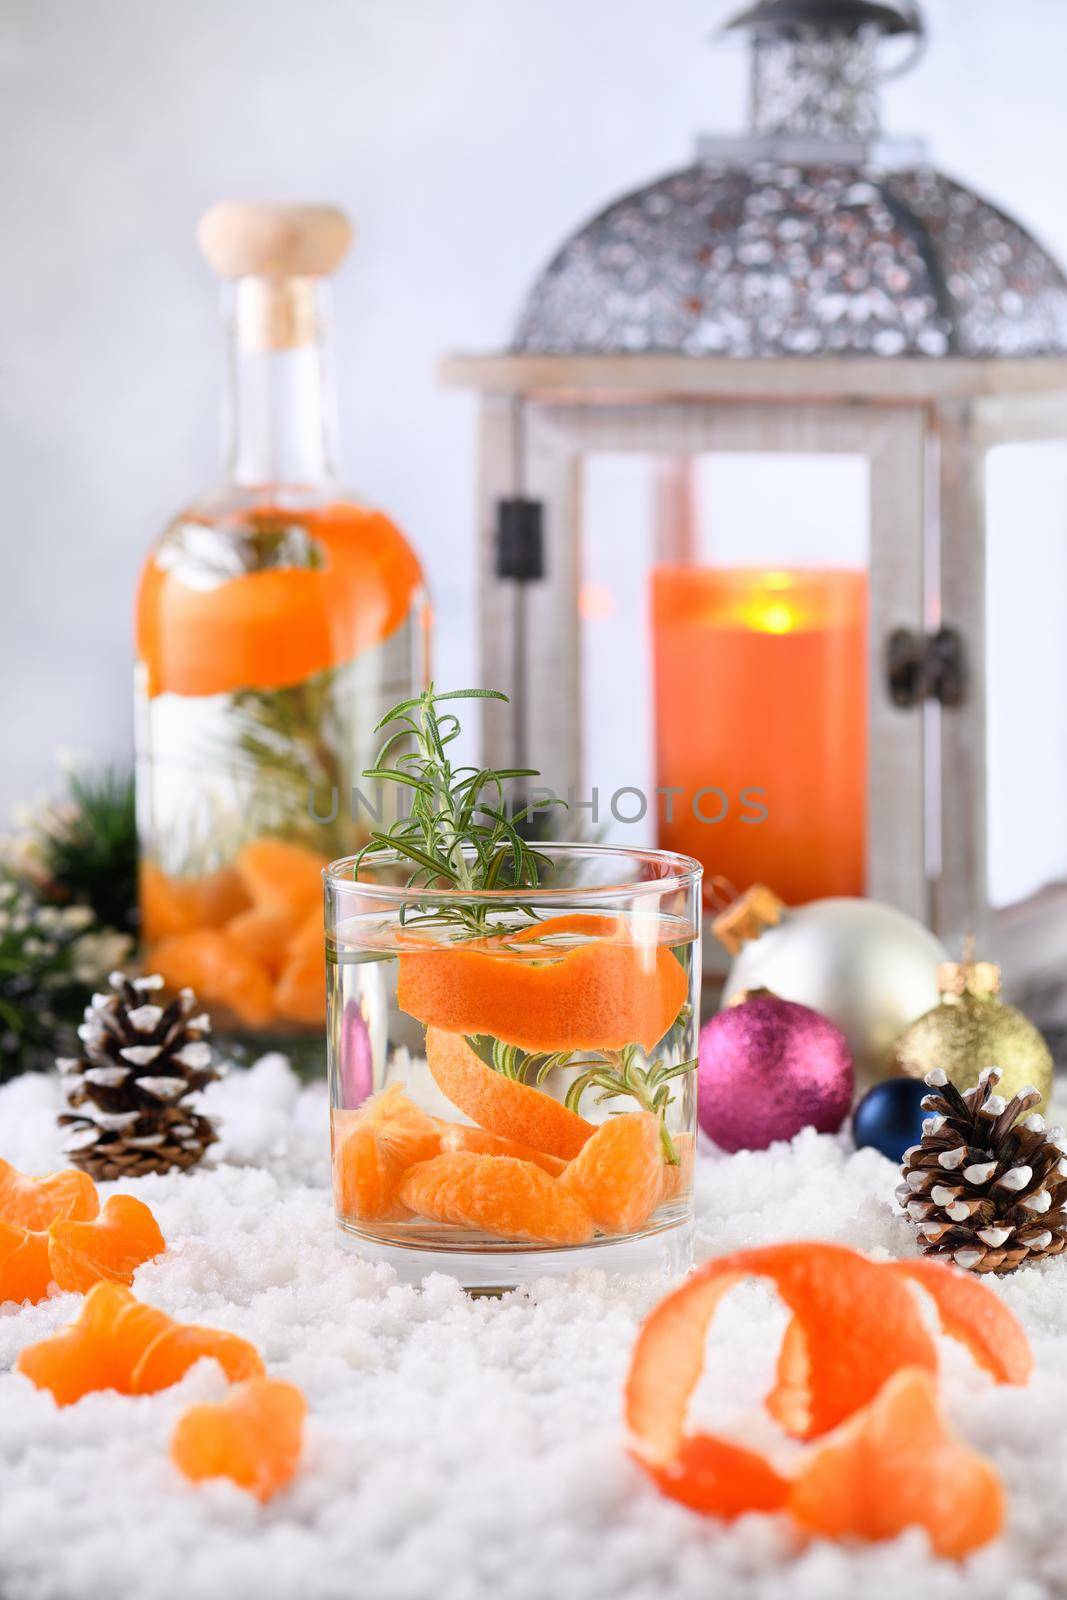 Clementine, ginger and gin with rosemary by Apolonia